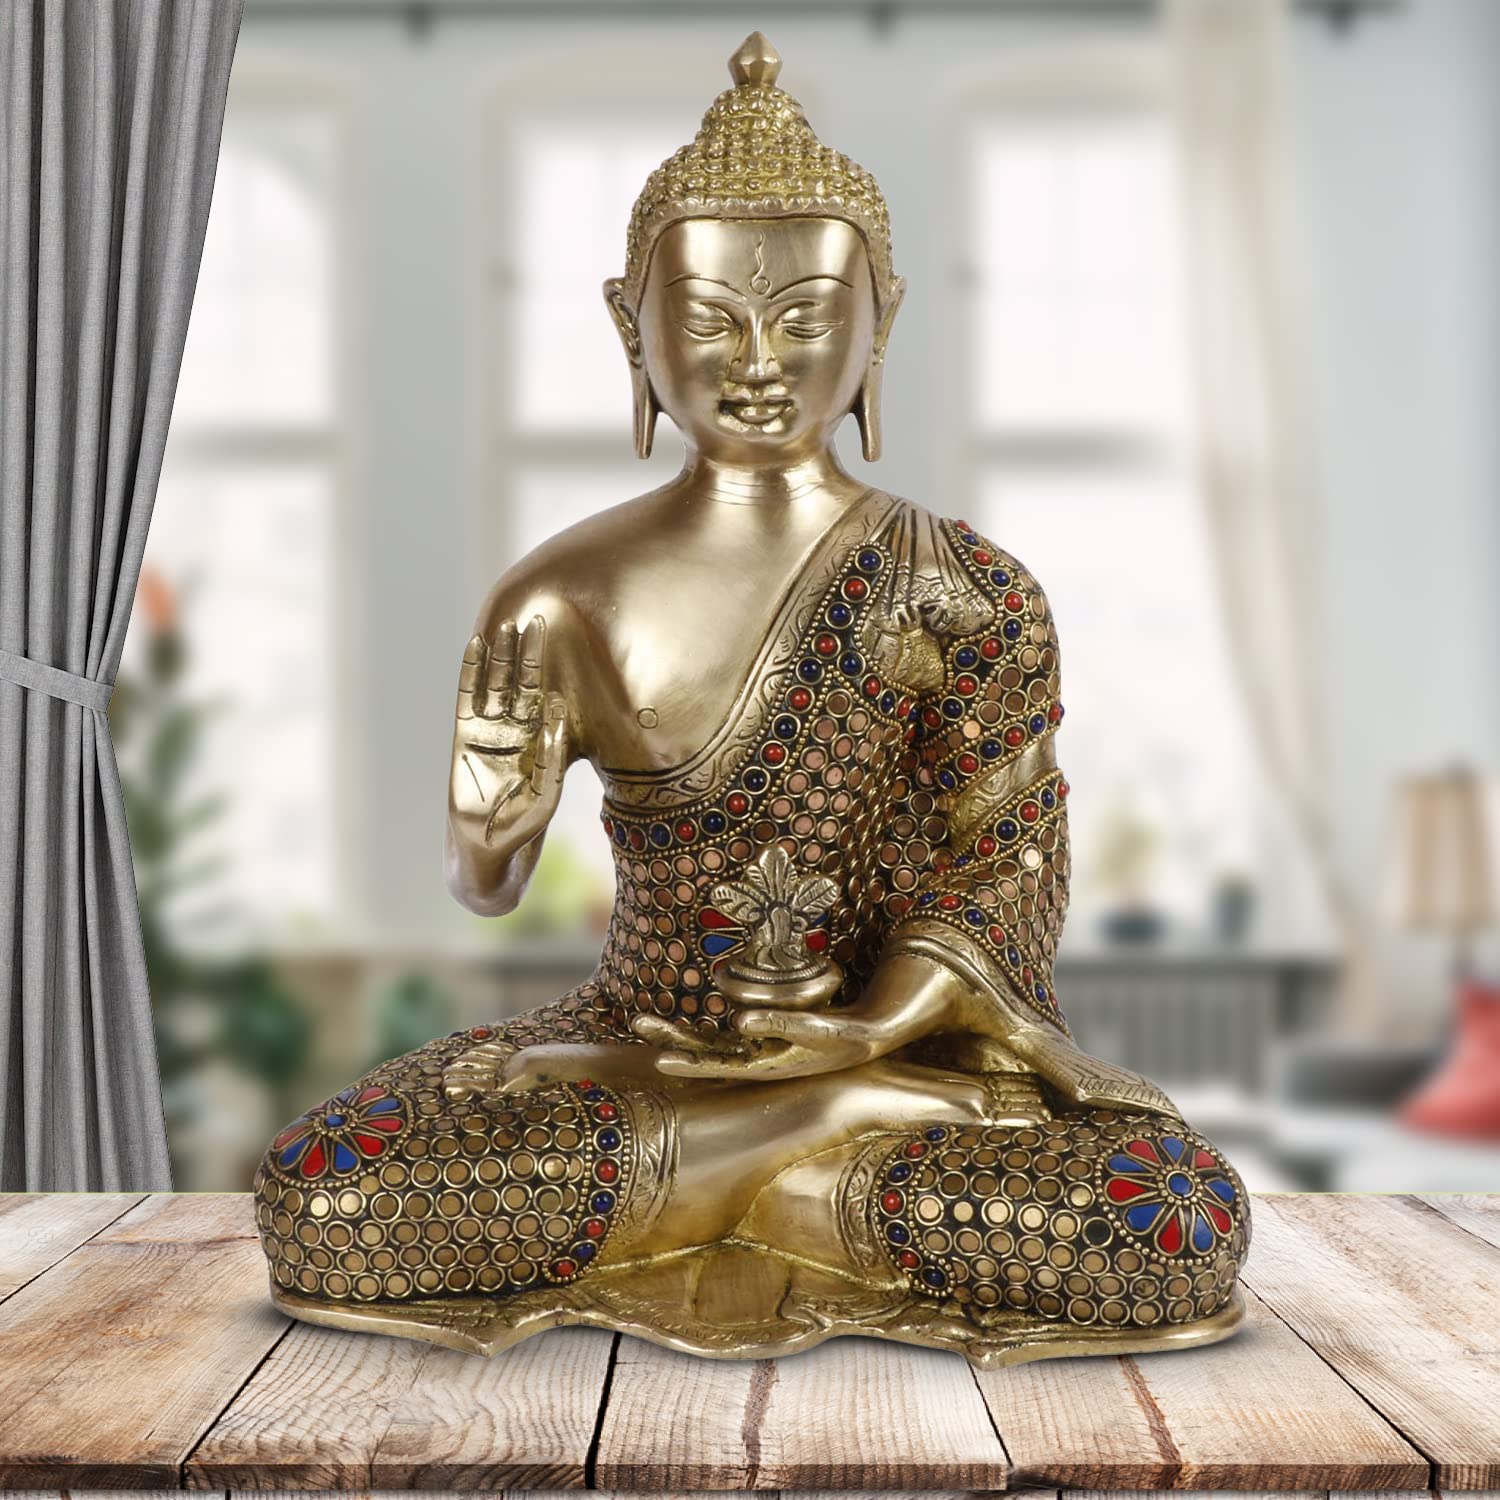 Brass Statue Idol Murti of Buddha in Blessing Colored Decoration - Taajoo